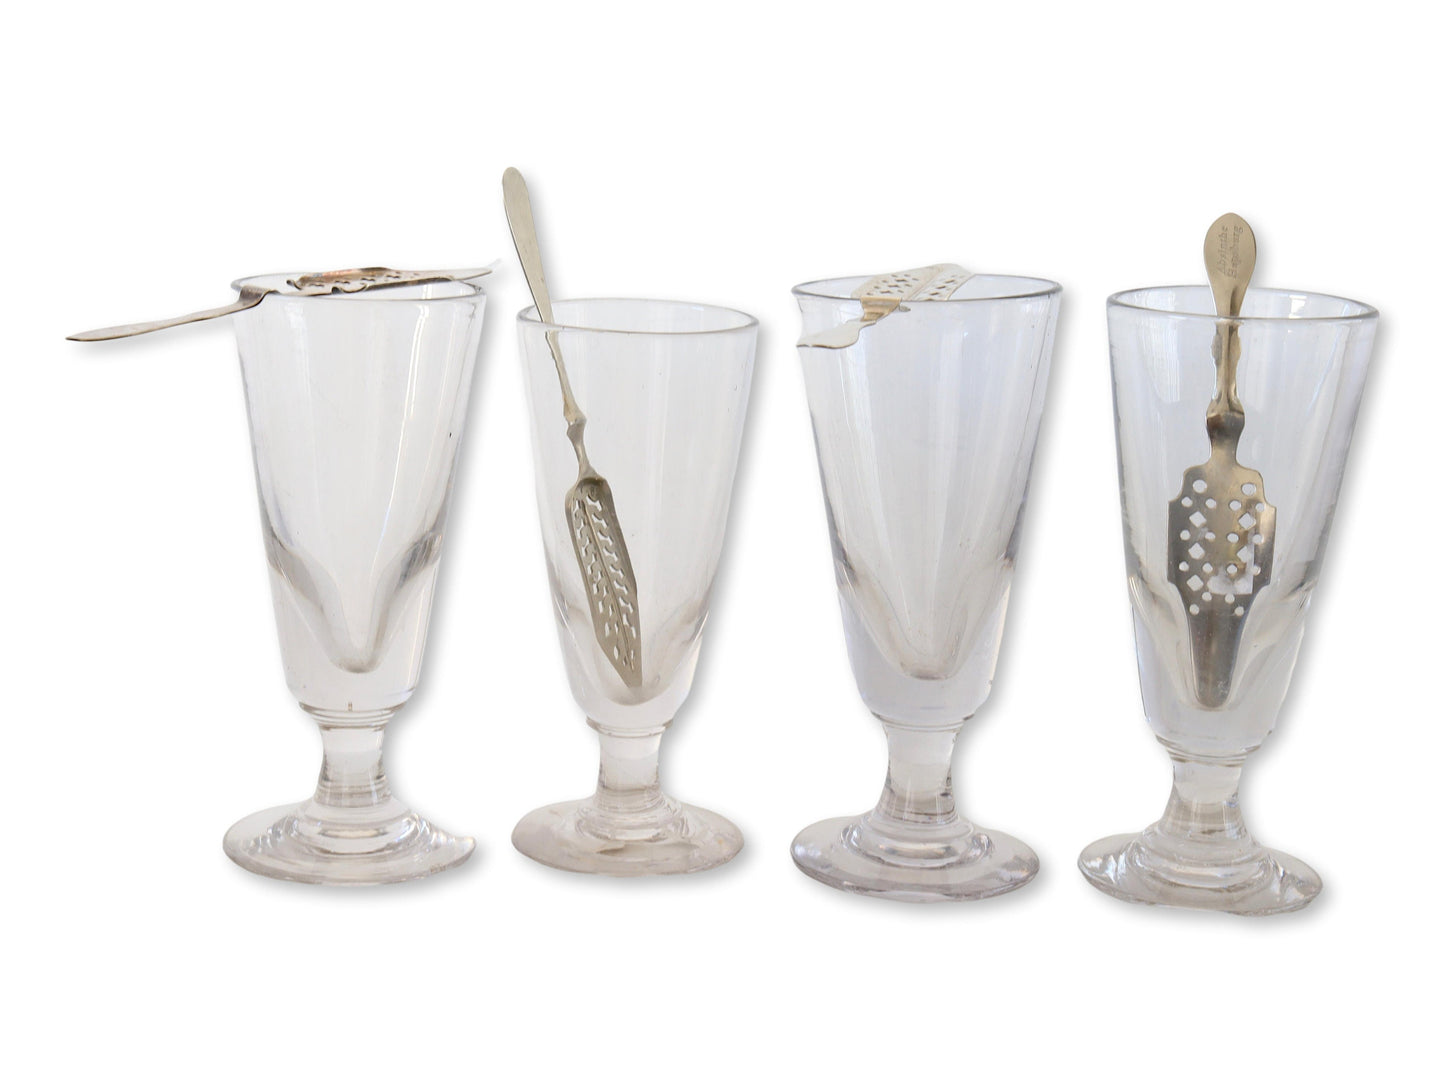 1880s French Absinthe Glasses w/ Spoons